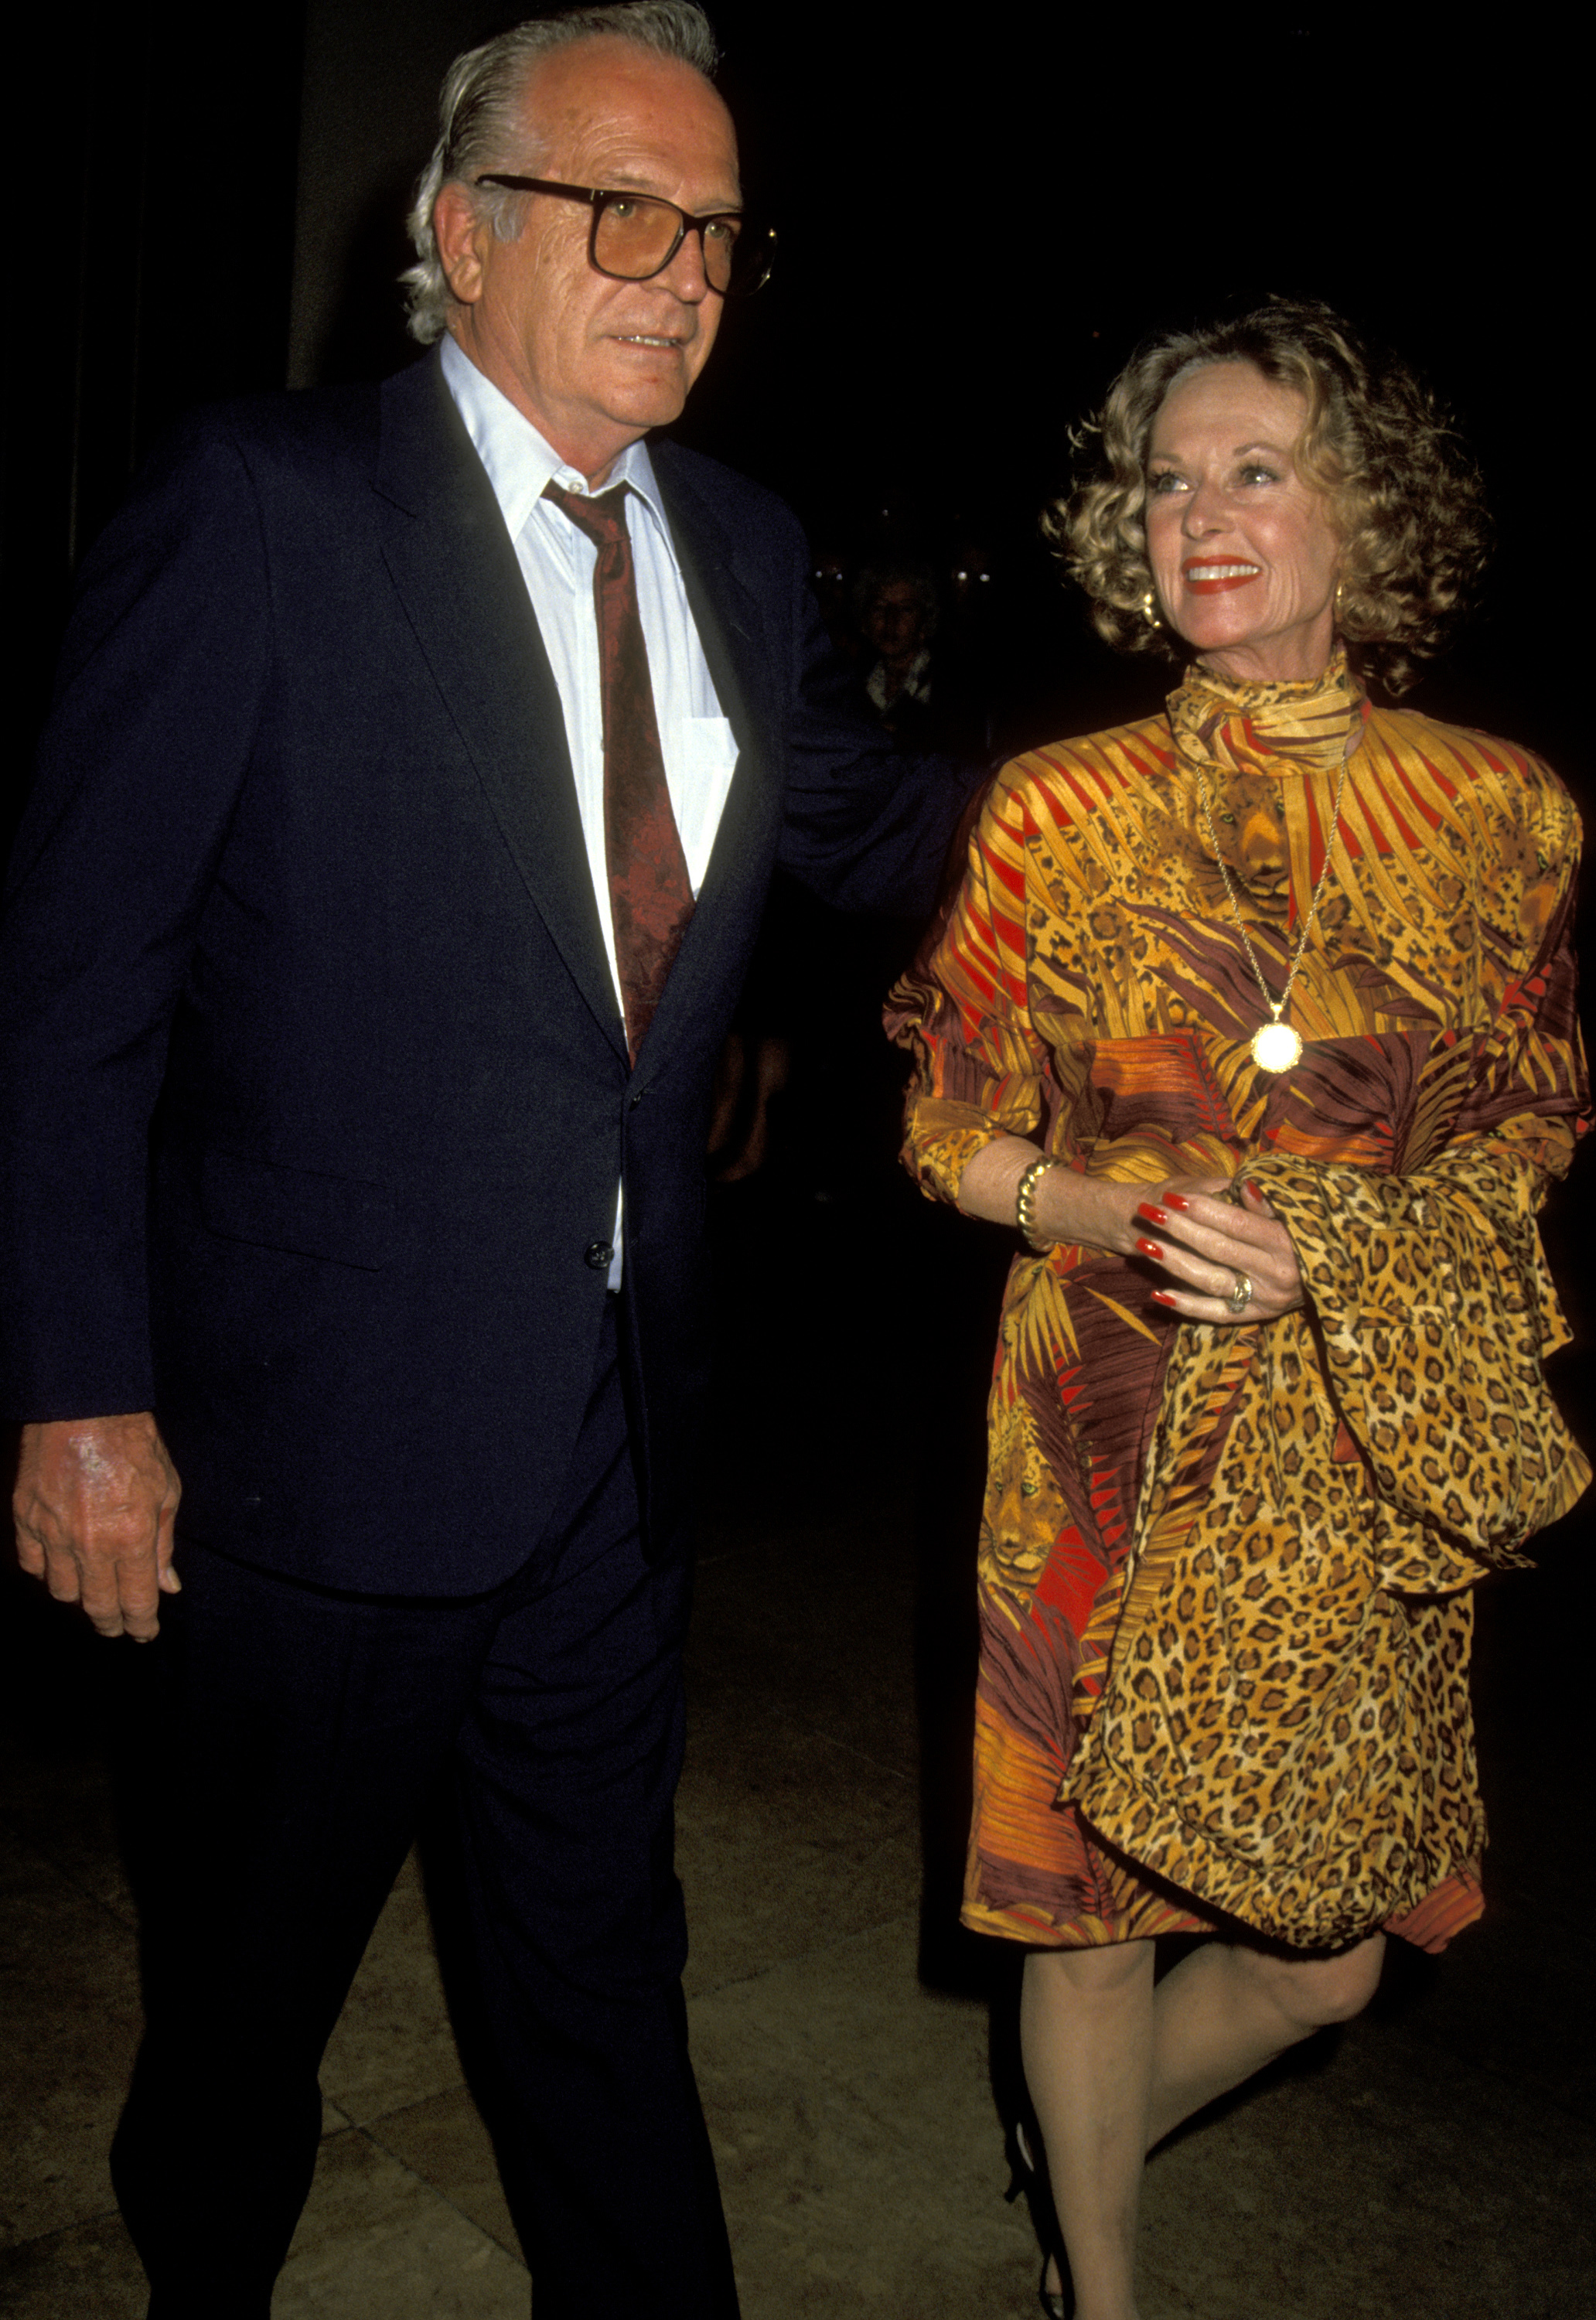 Luis Barrenecha and Tippi Hedren during George Schlatter Honored at Benefit for the Scott Newman Center in Beverly Hills, California, on November 1, 1992. | Source: Getty Images